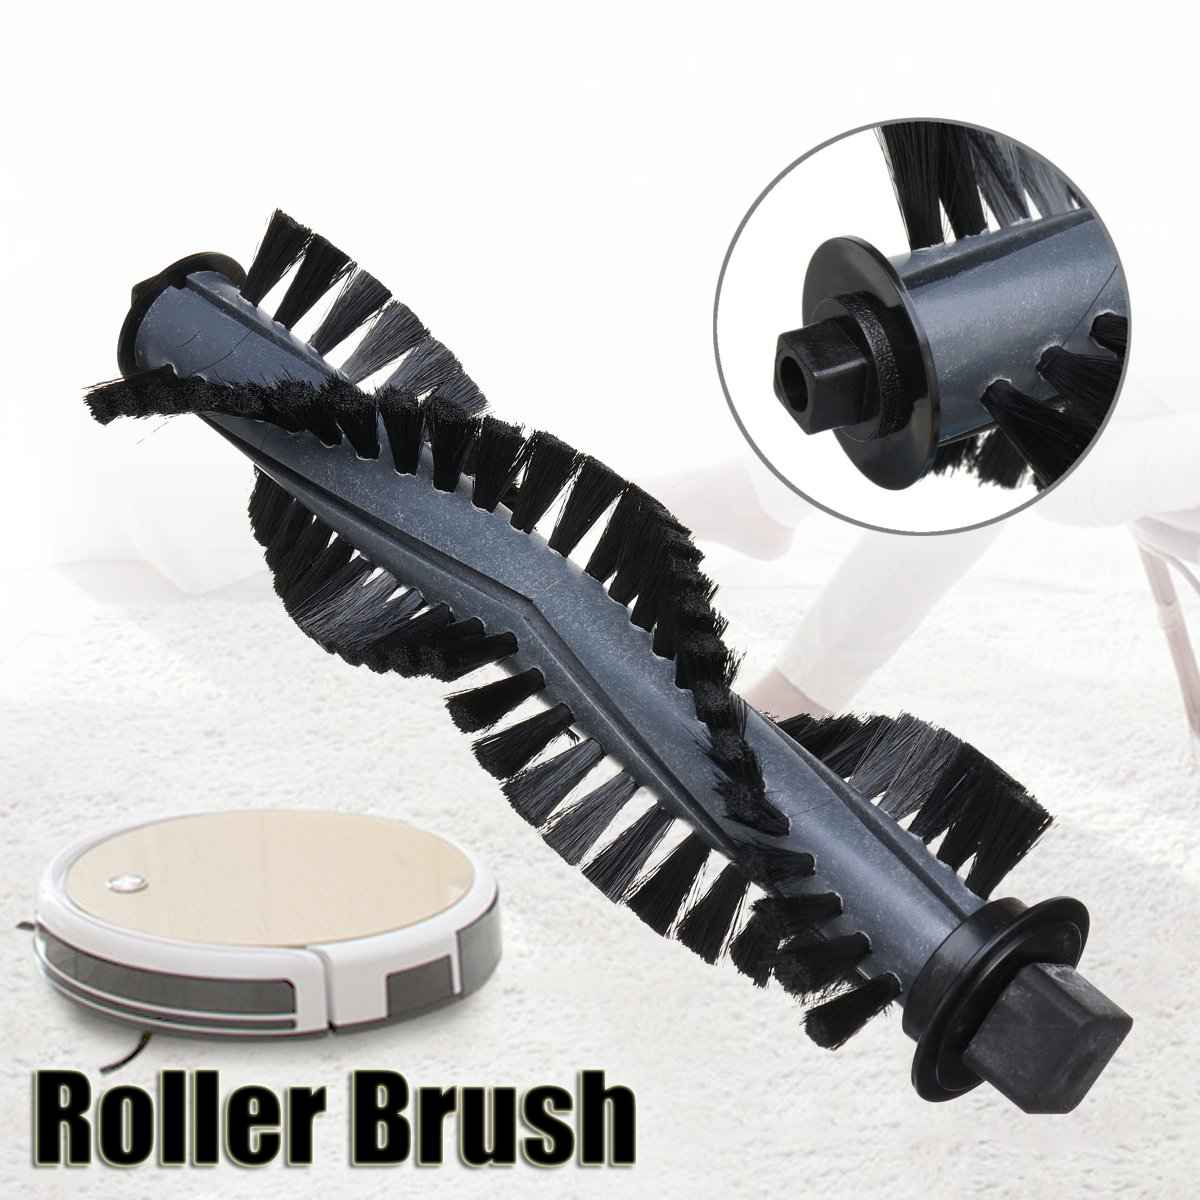 1Pcs-Main-Roller-Brush-Replacement-Part-for-ILIFE-A4S-Robot-Vacuum-Cleaner-1390782-3